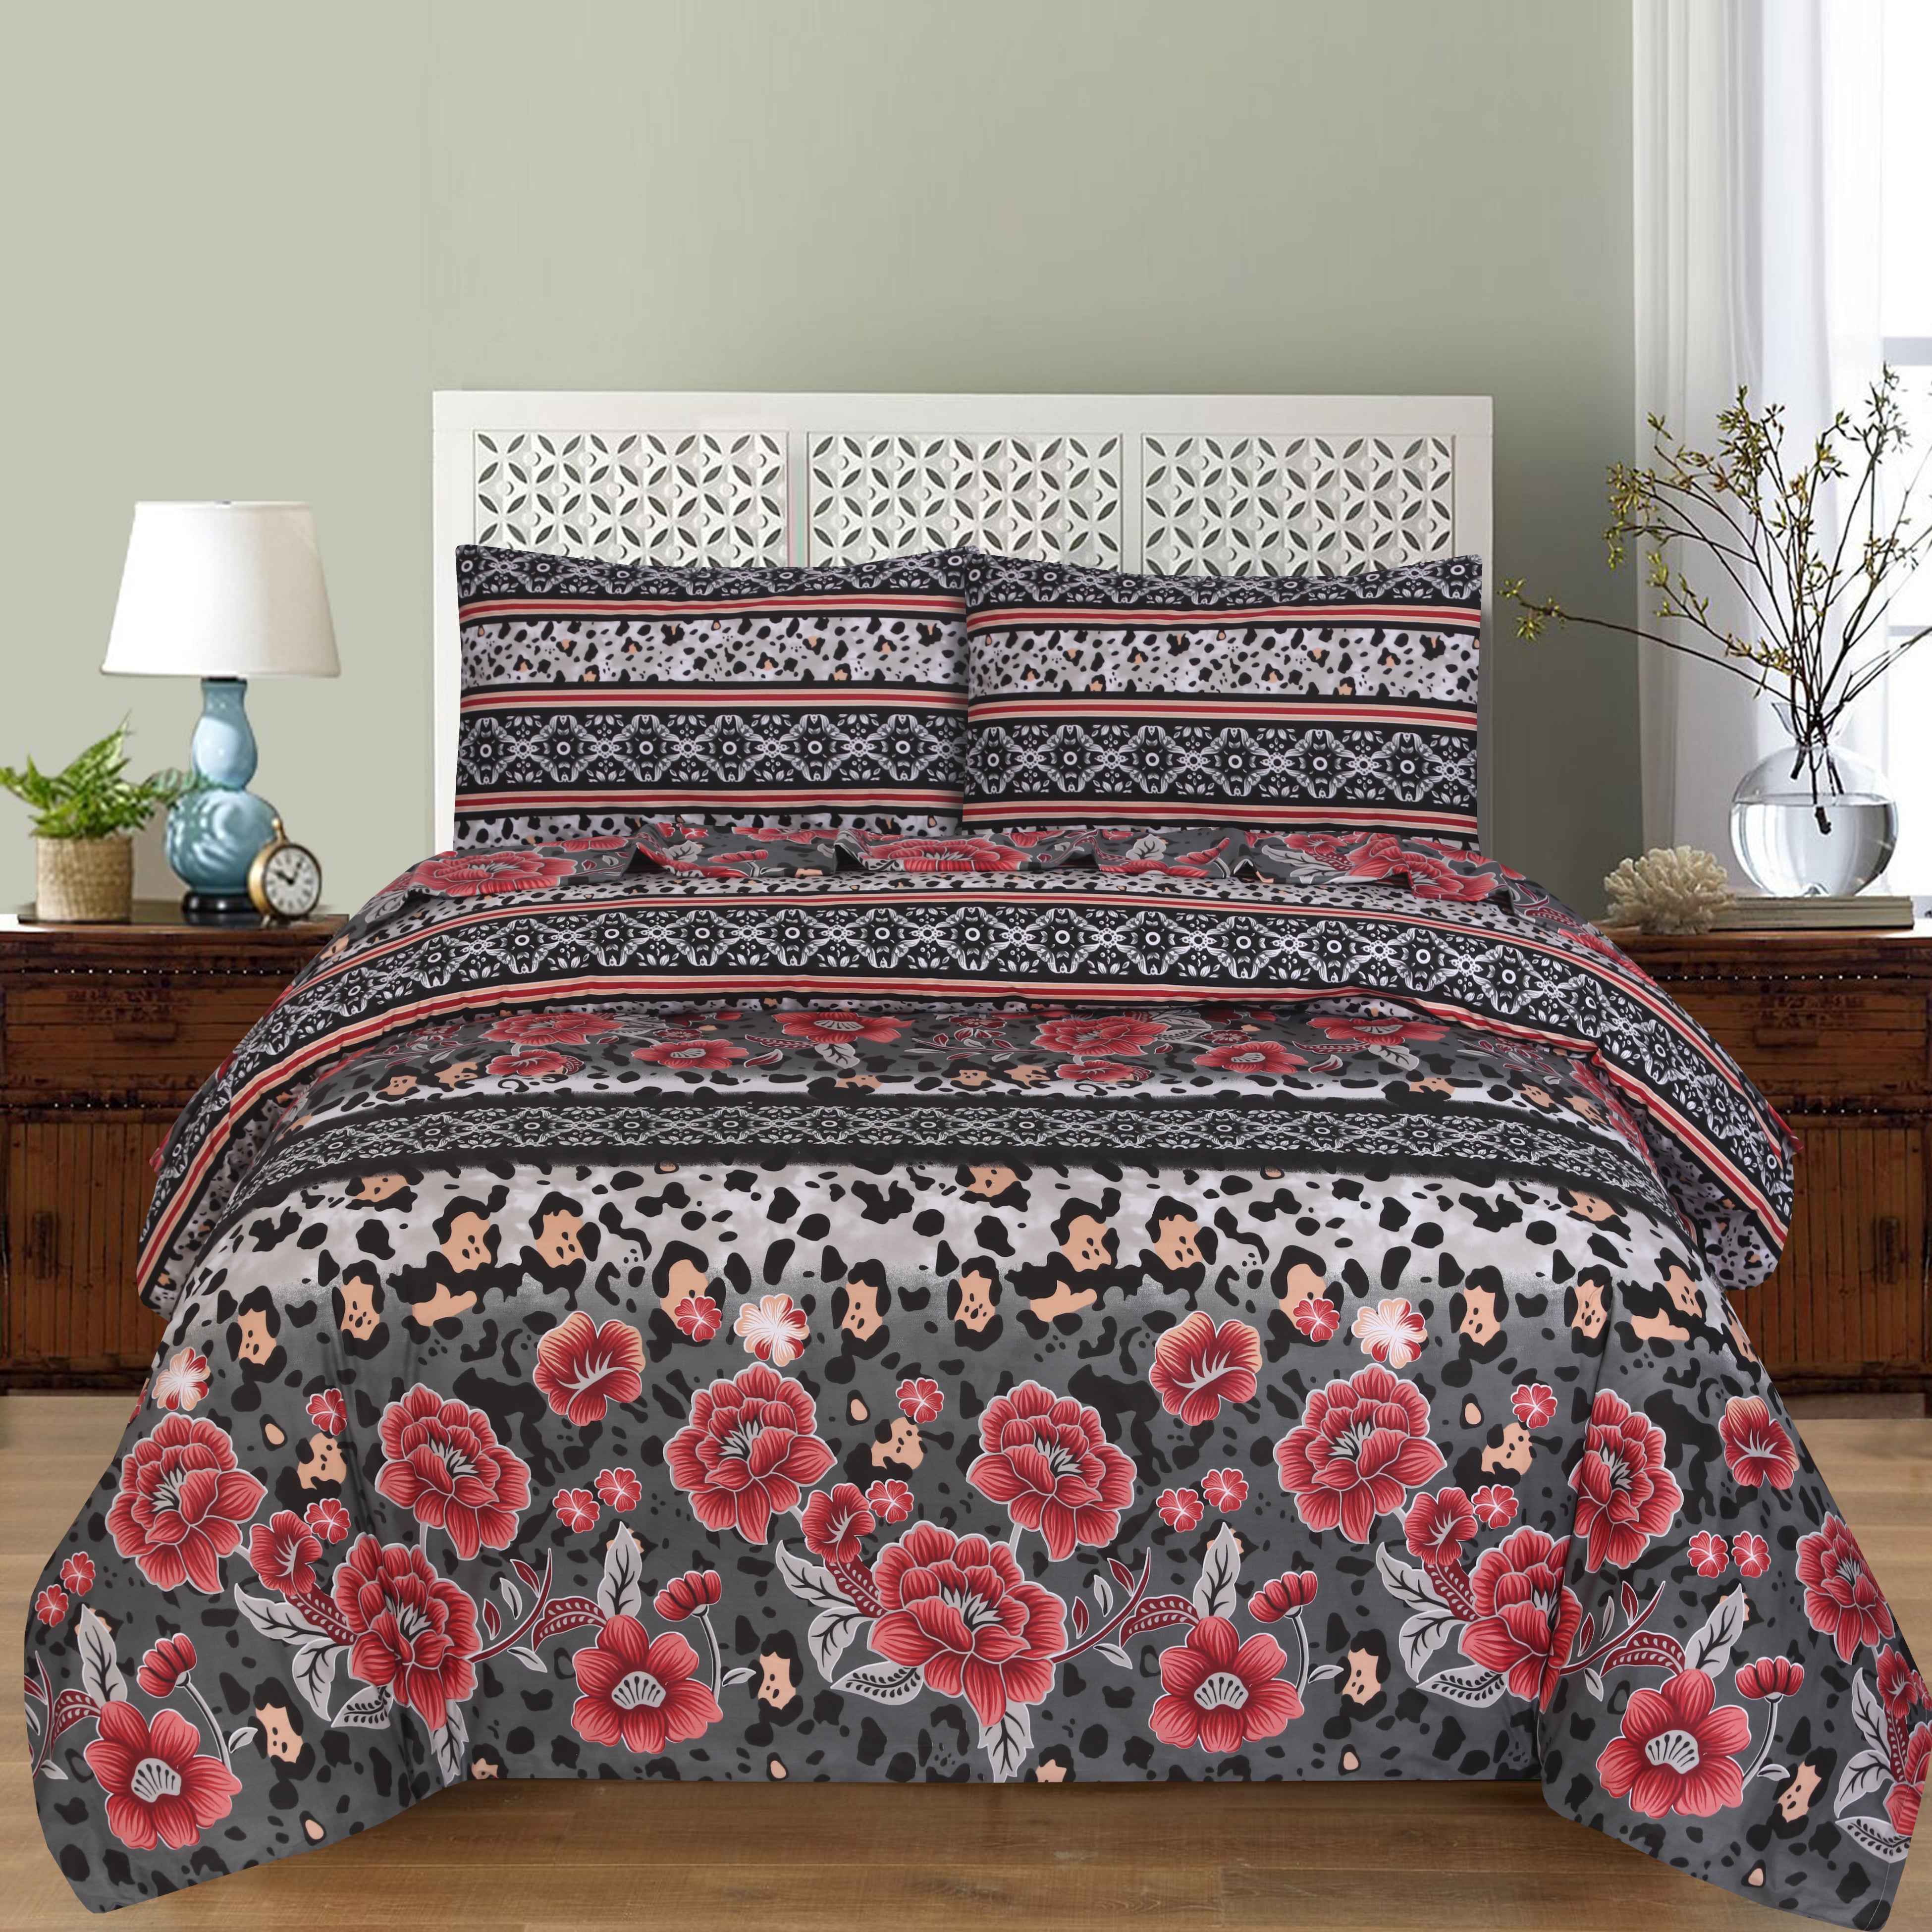 Red Peony-Duvet Cover Set 4pc